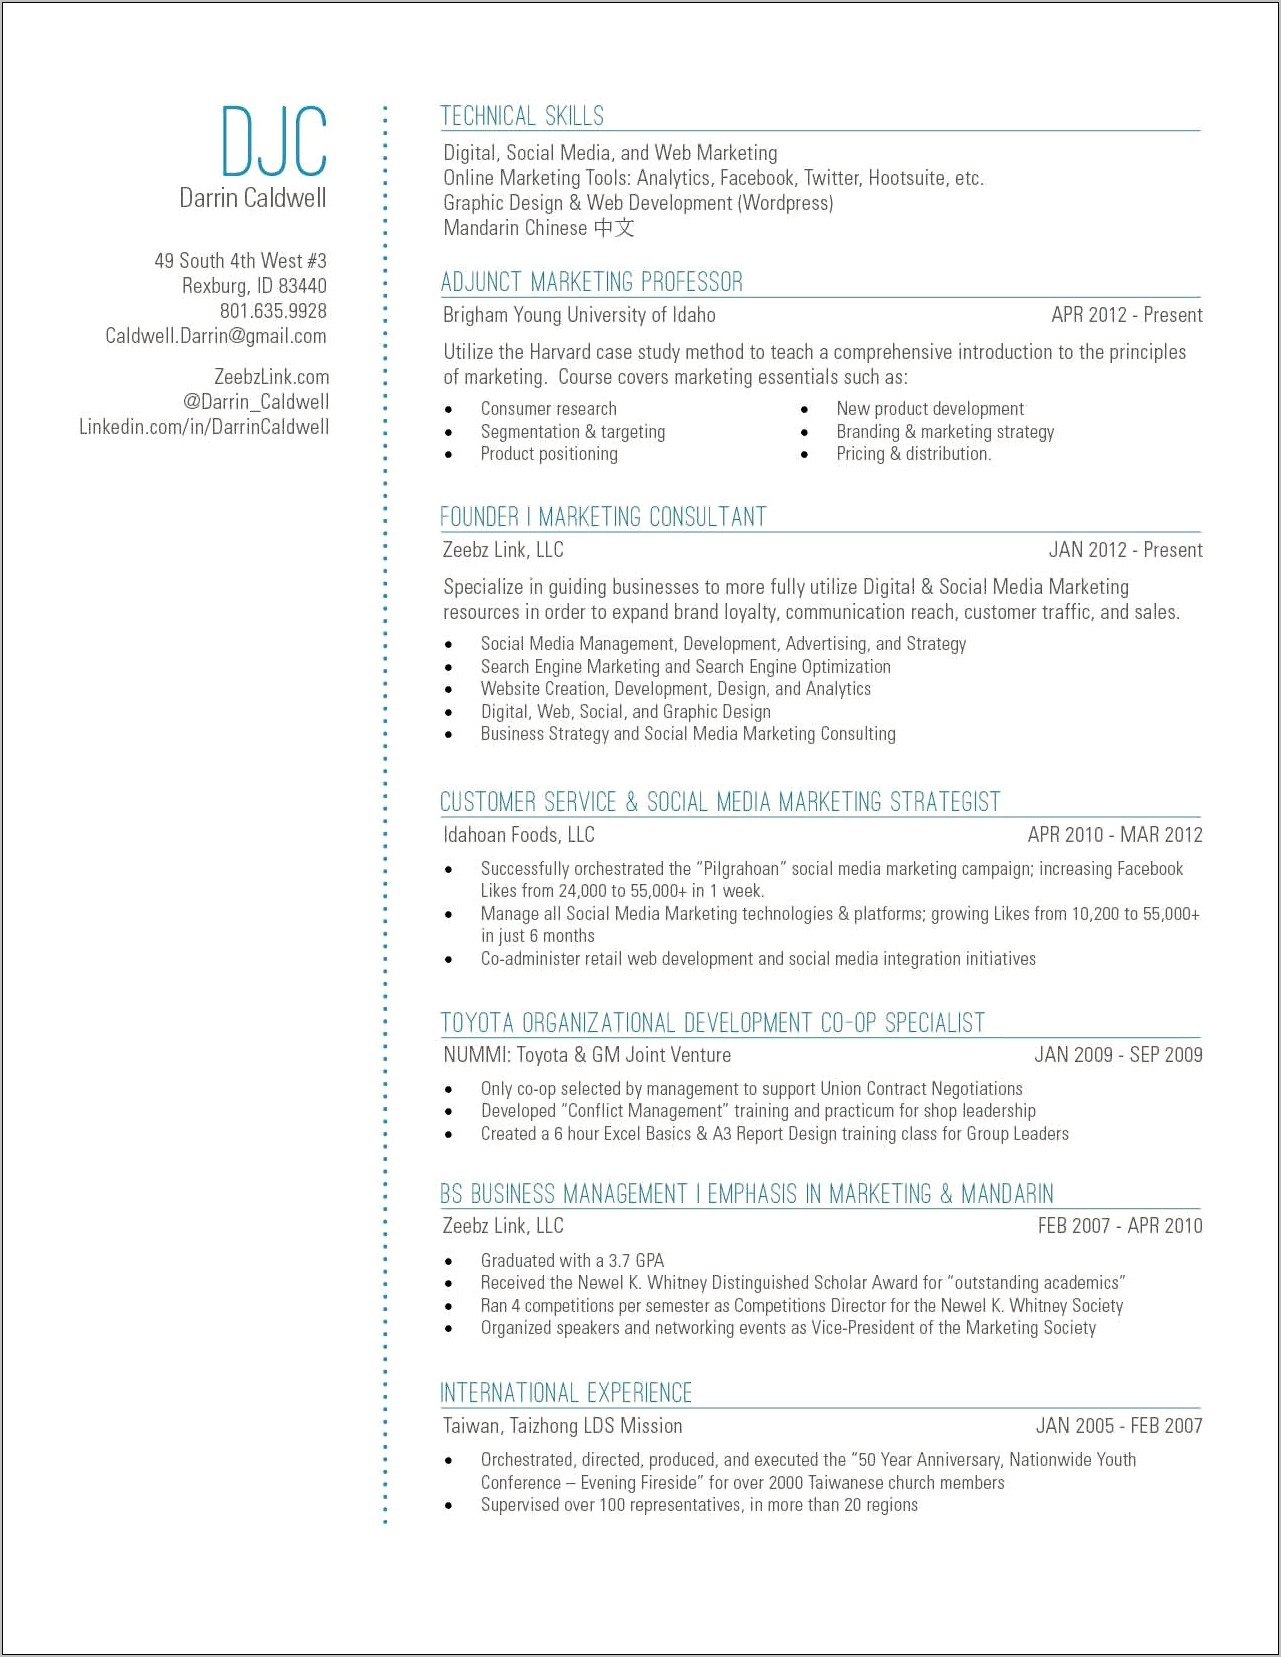 Put My Own Website Developing Experience On Resume